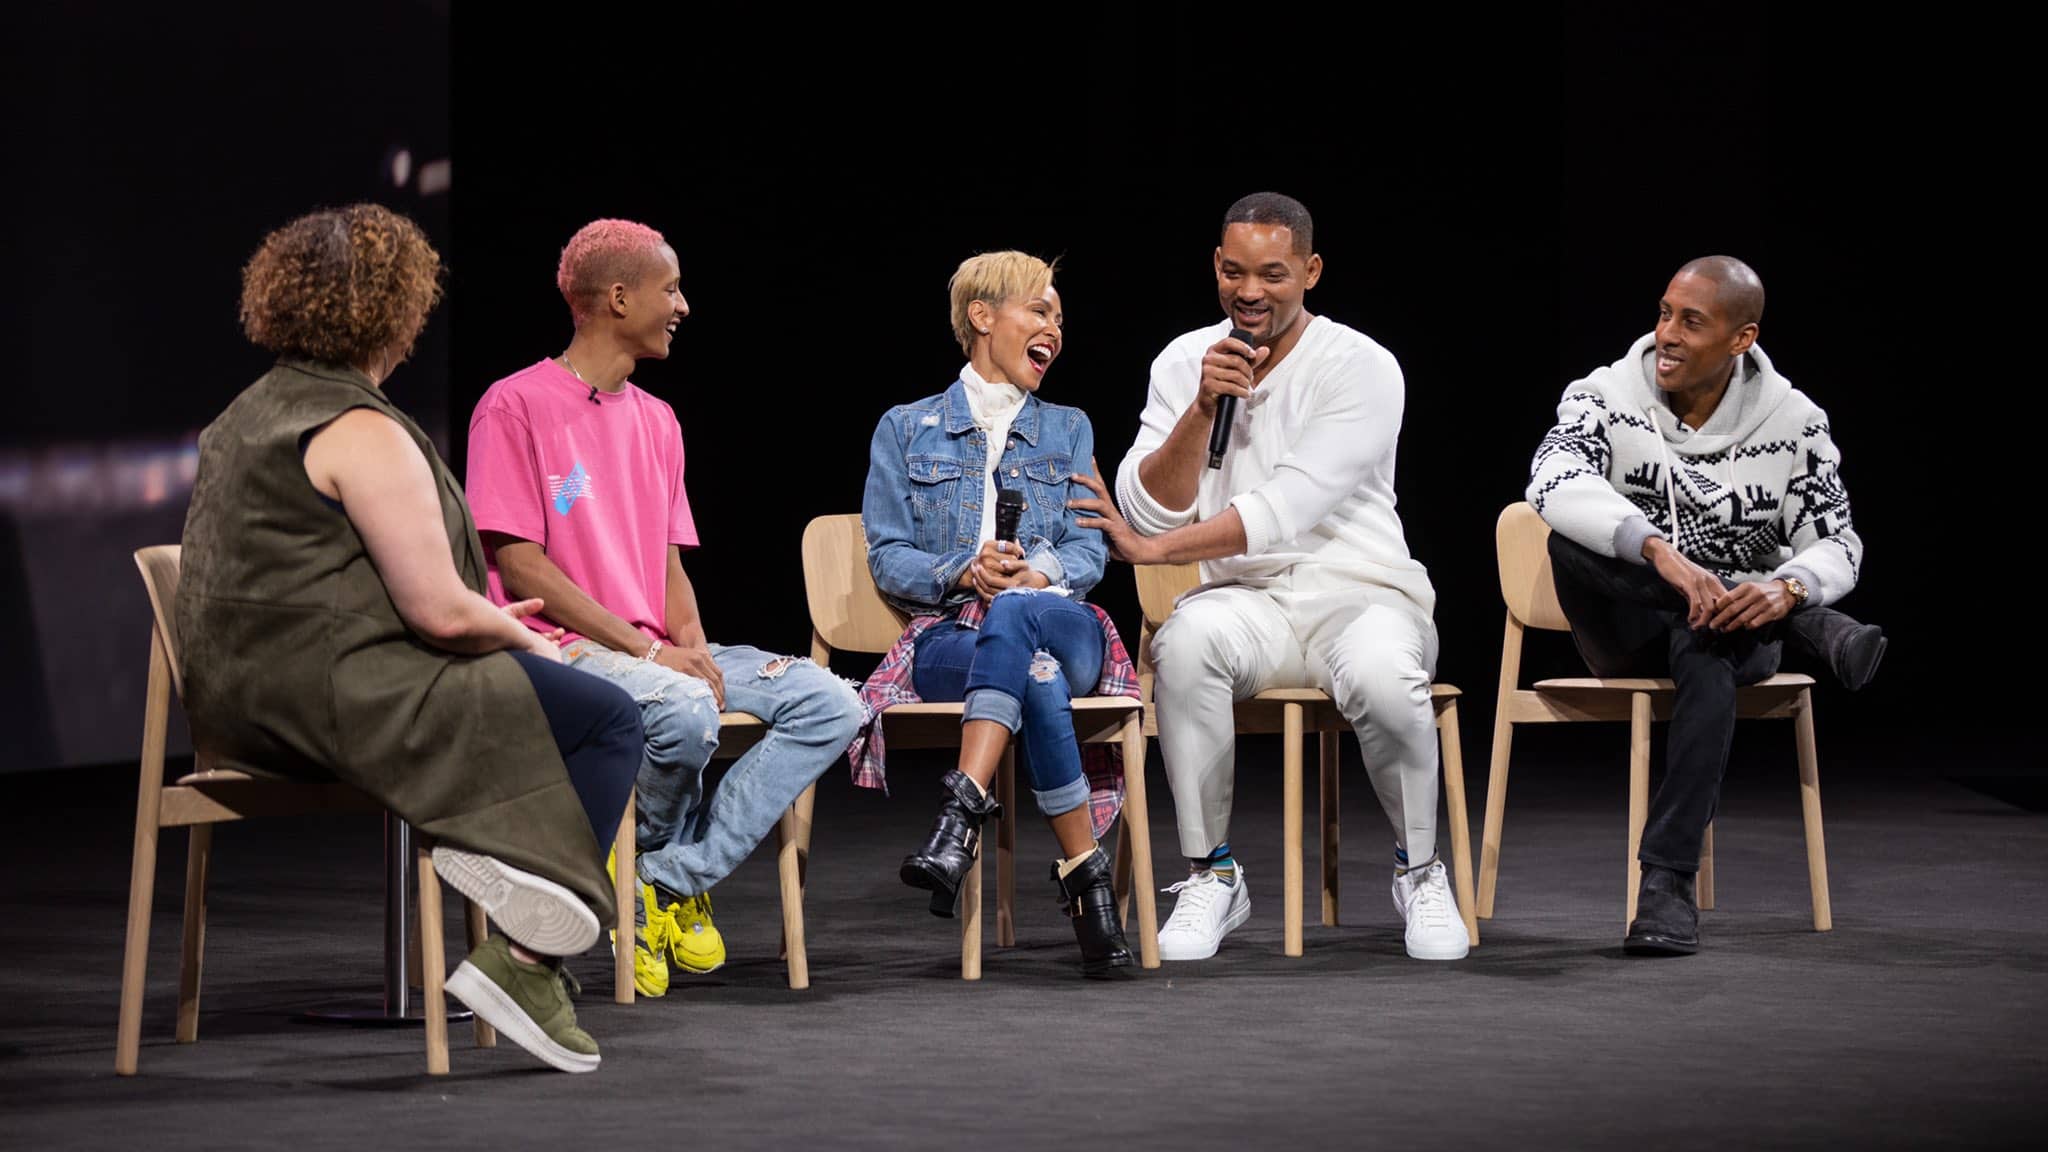 Will Smith Visits Apple Campus Ahead of Earth Day